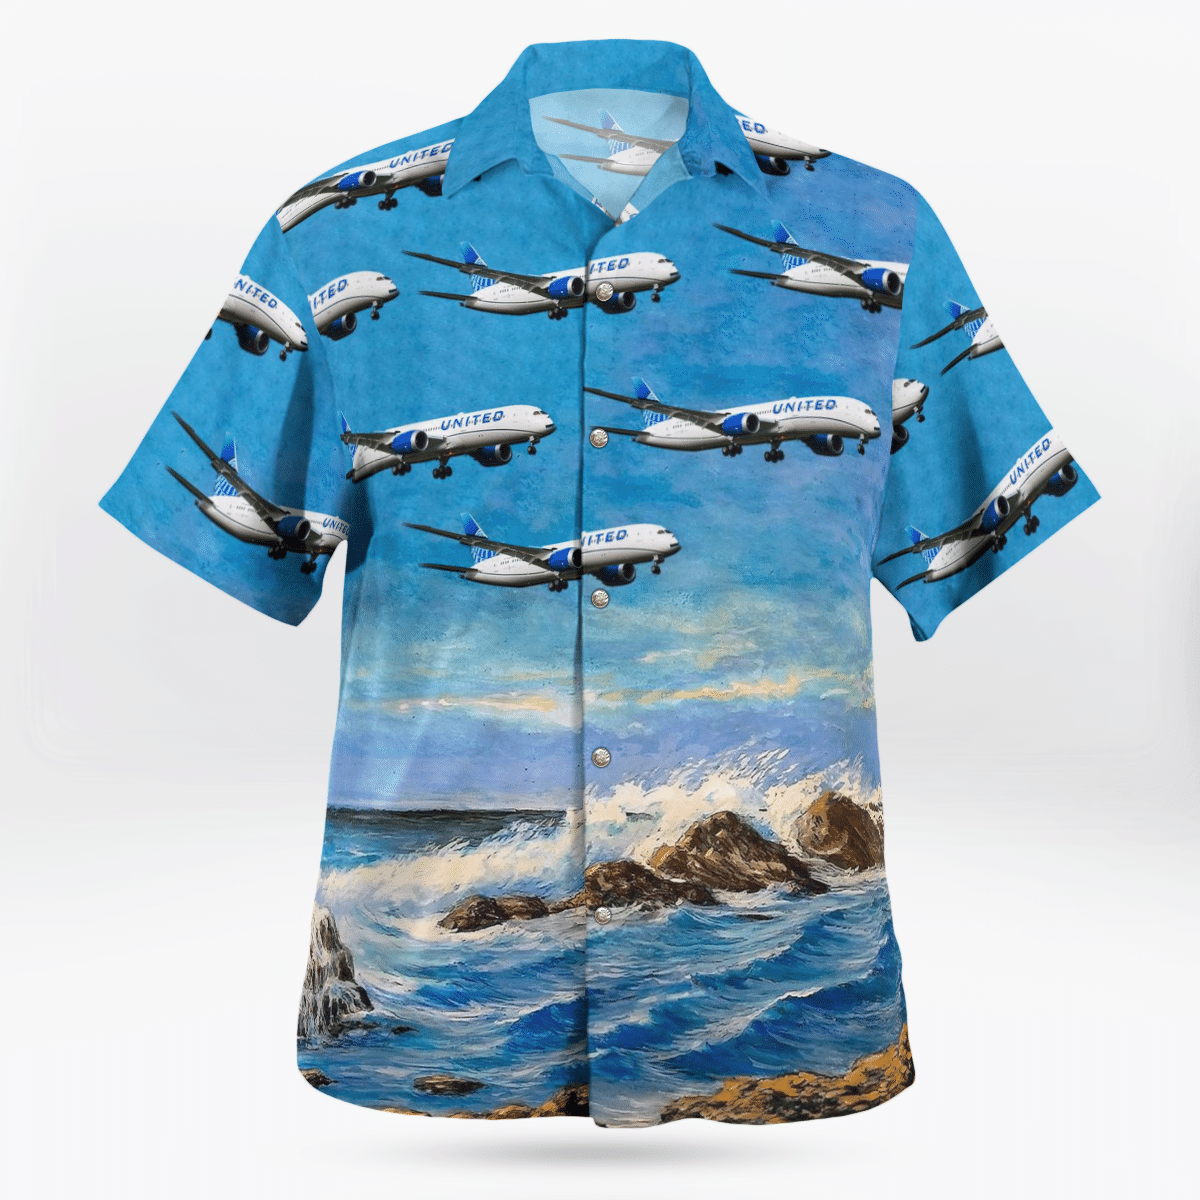 HOT United Airlines Boeing 787-9 Dreamliner Tropical Shirt2